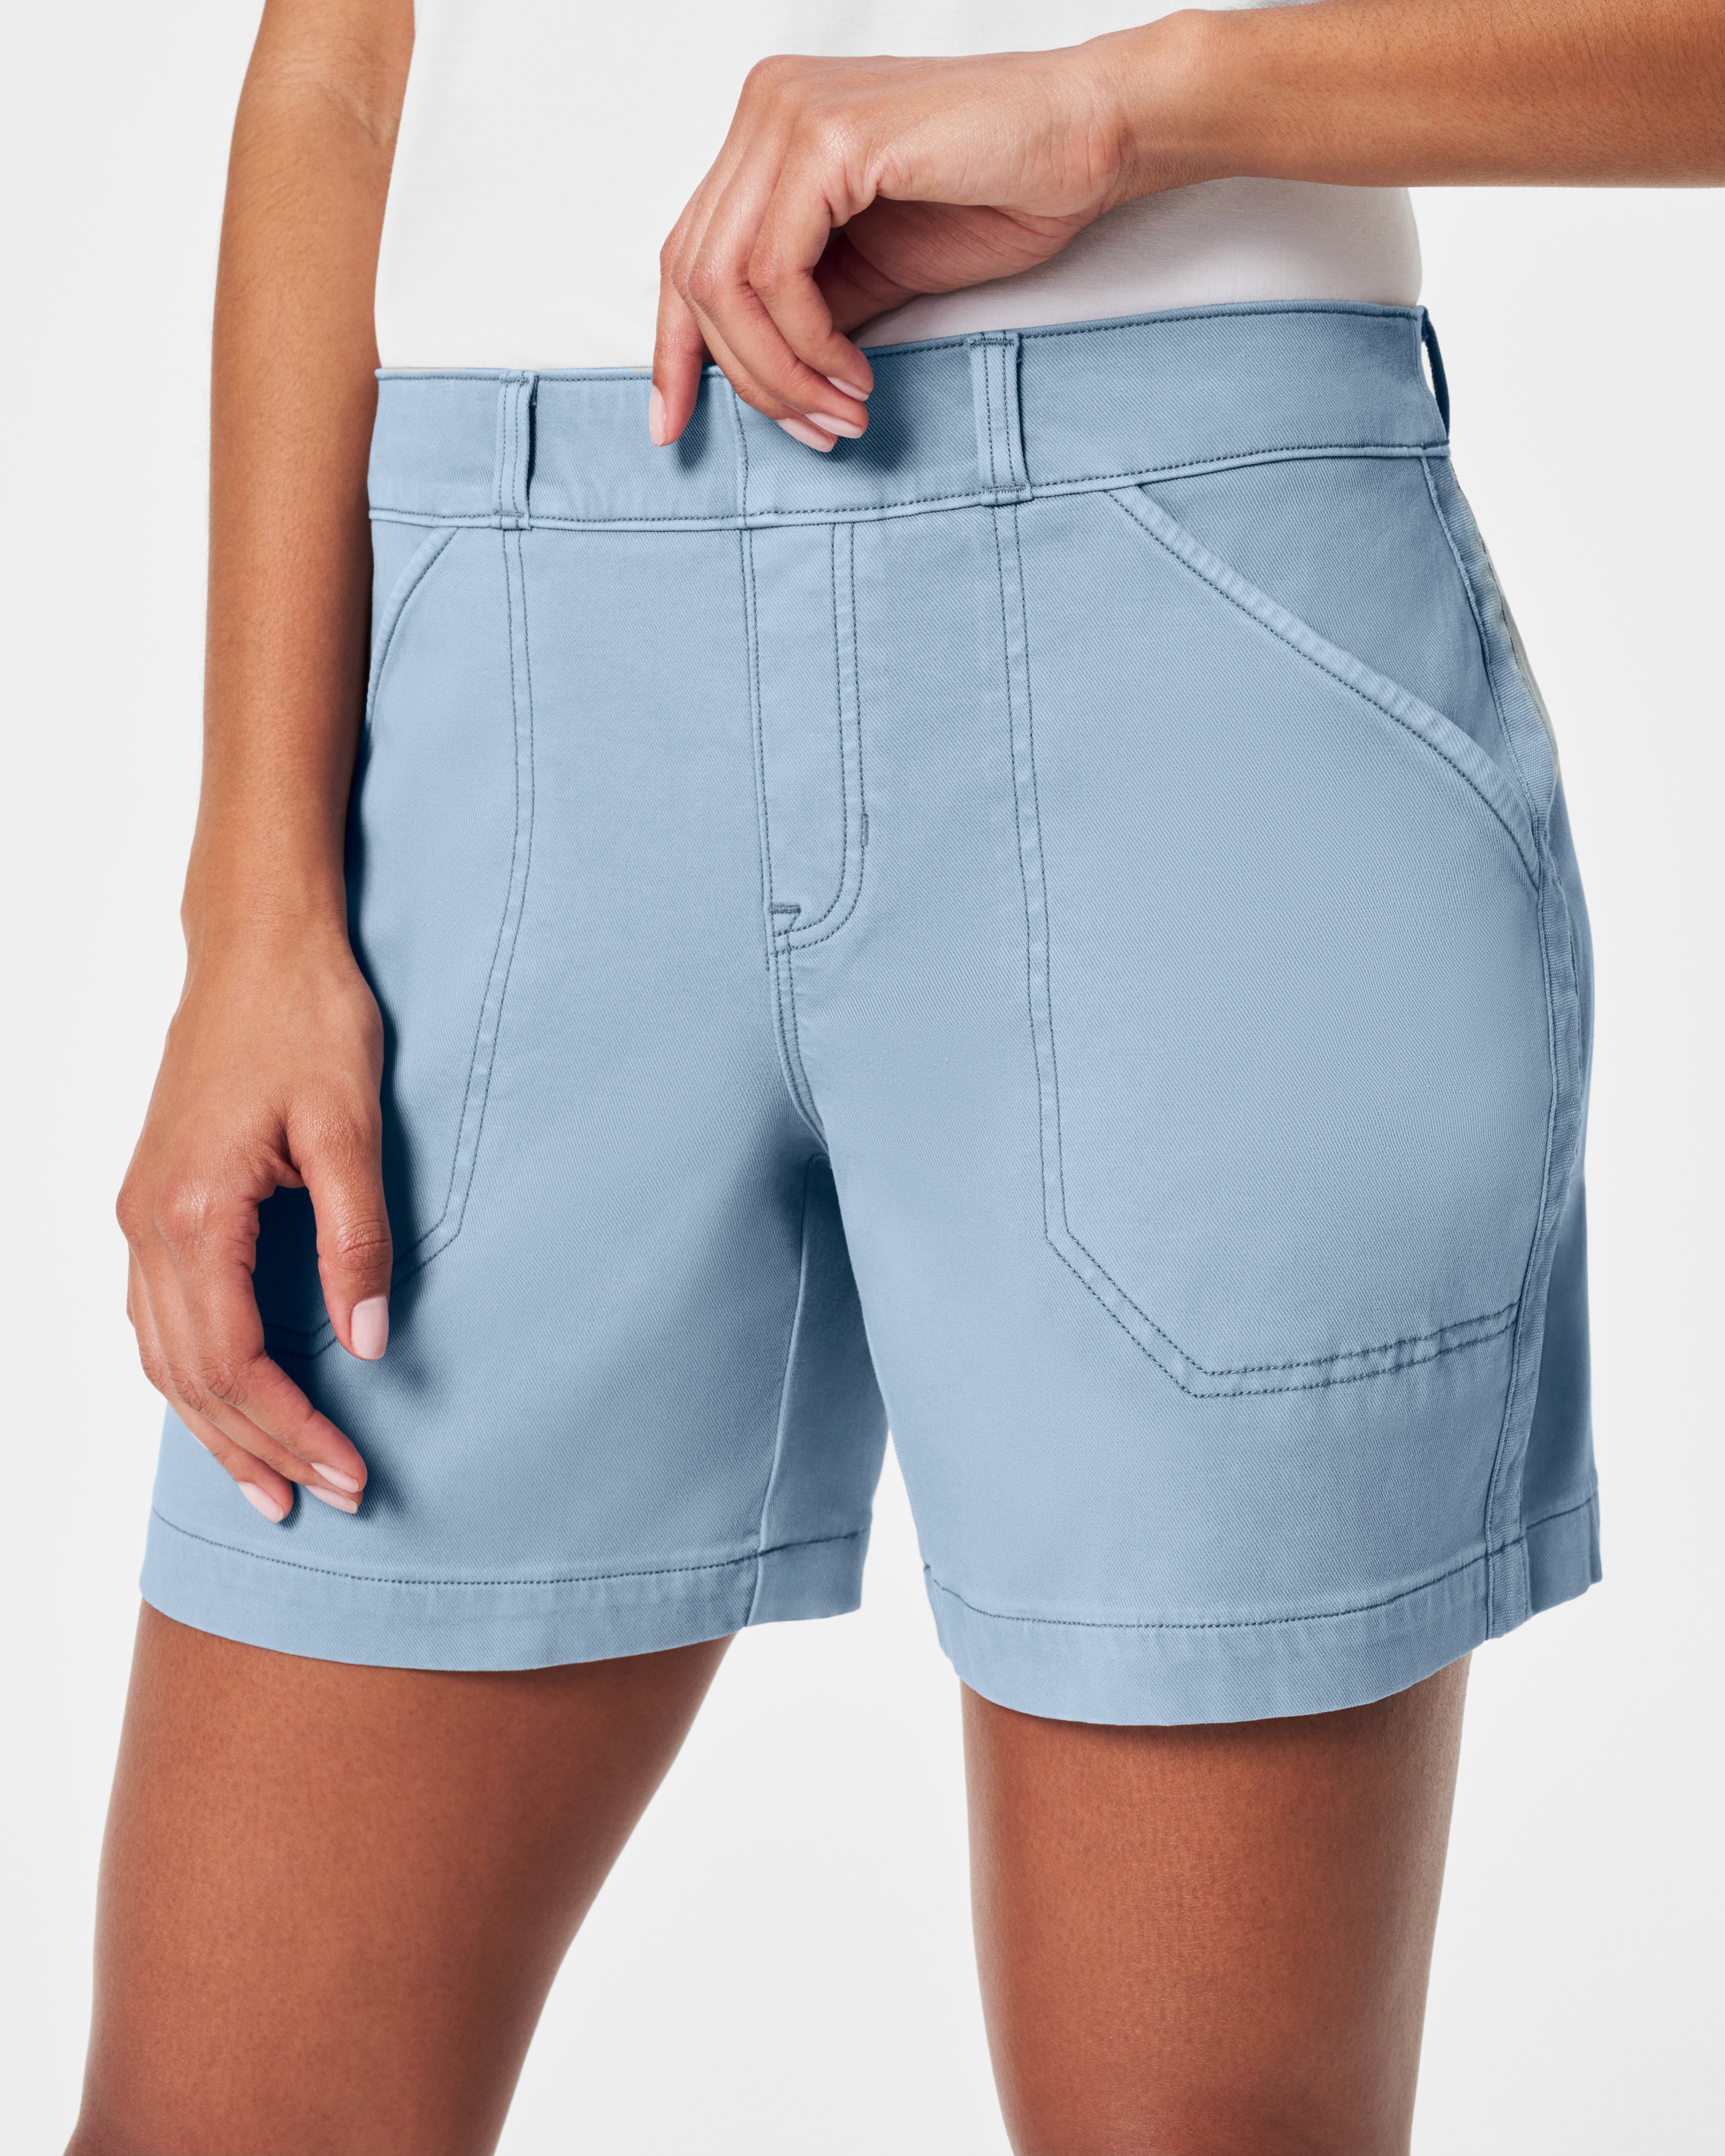 New Spanx Sunshine Shorts S Small Blue Pull On Slimming